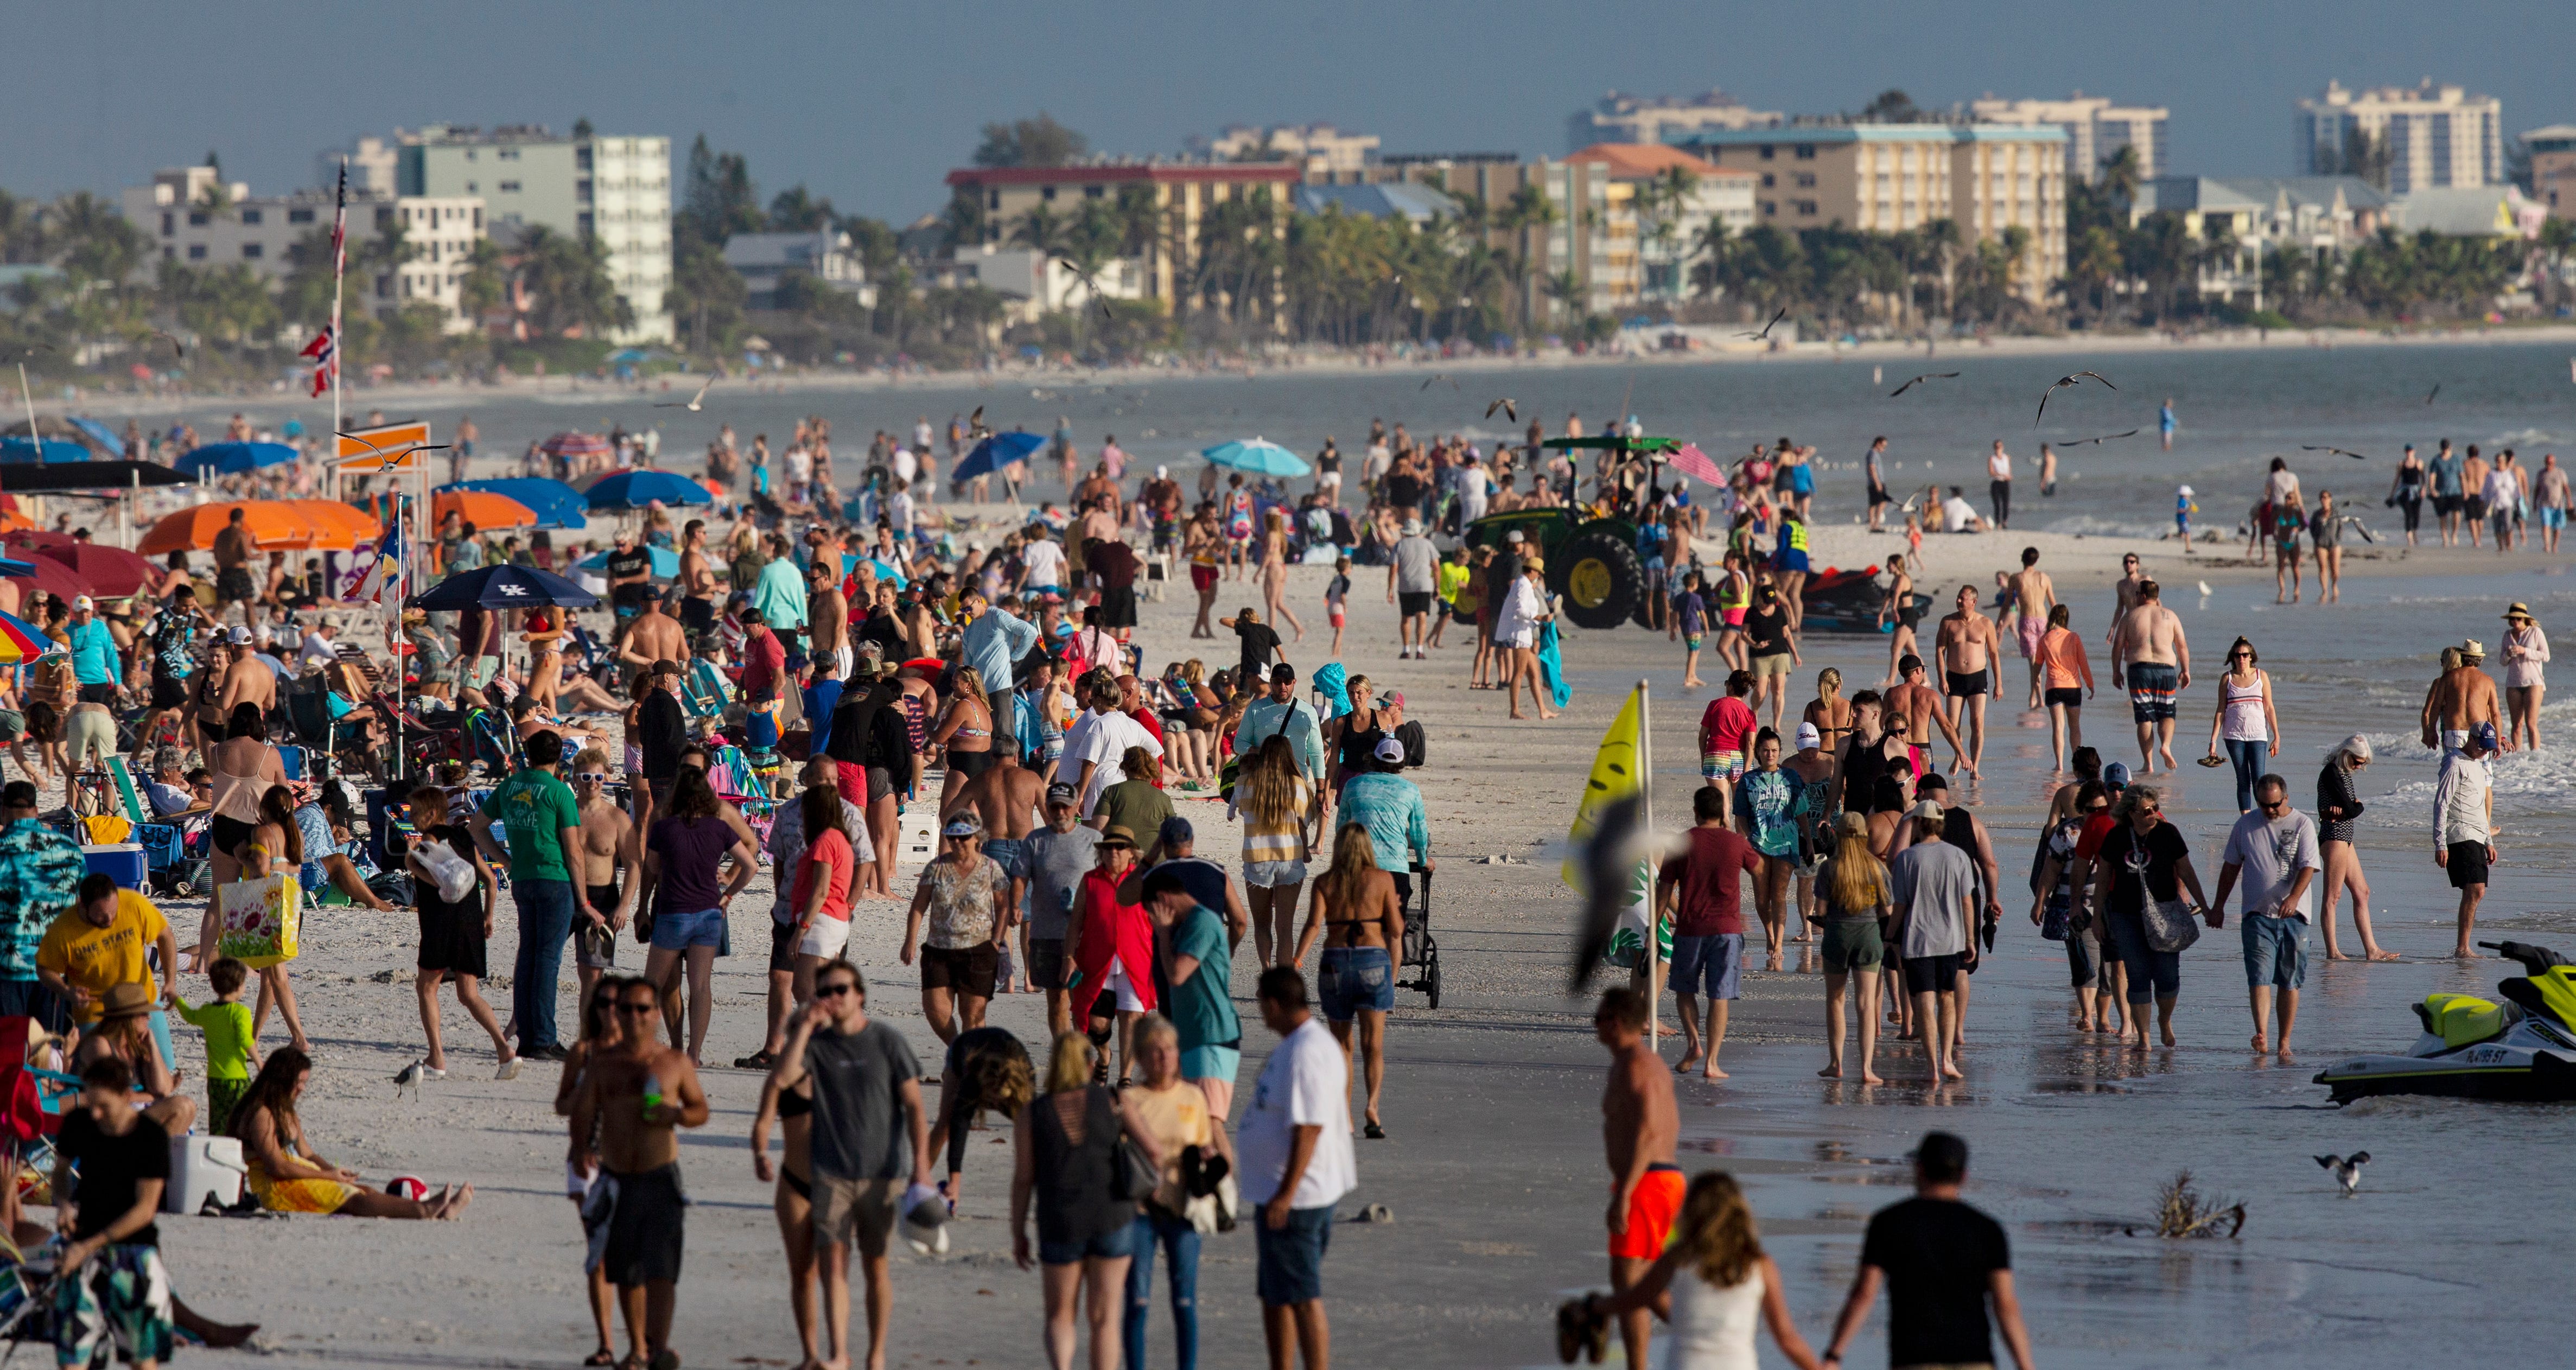 SW FL getting more crowded: Lee, Collier county populations rise